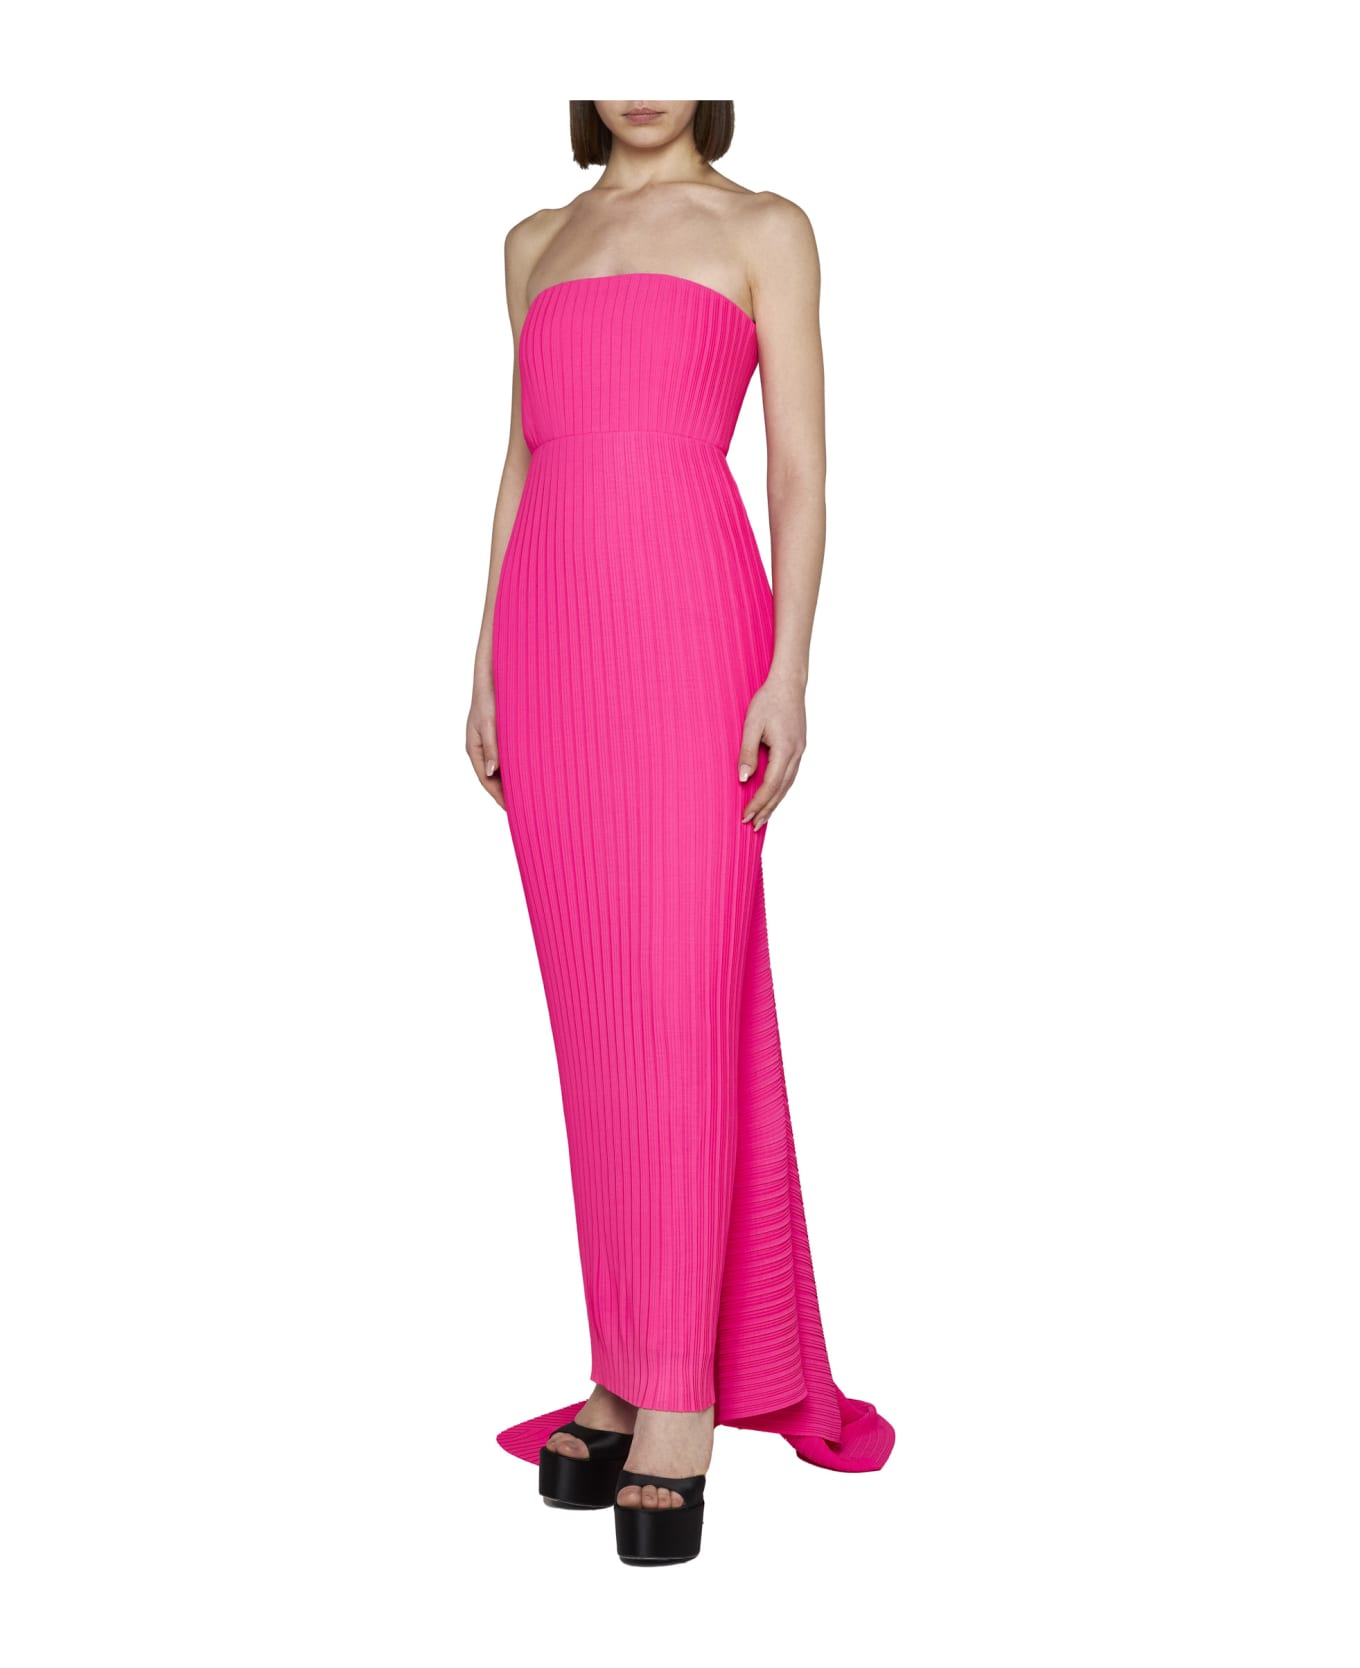 Solace London Pink Harlee Pleated Strapless Maxi Dress In Polyester Woman - Hot pink